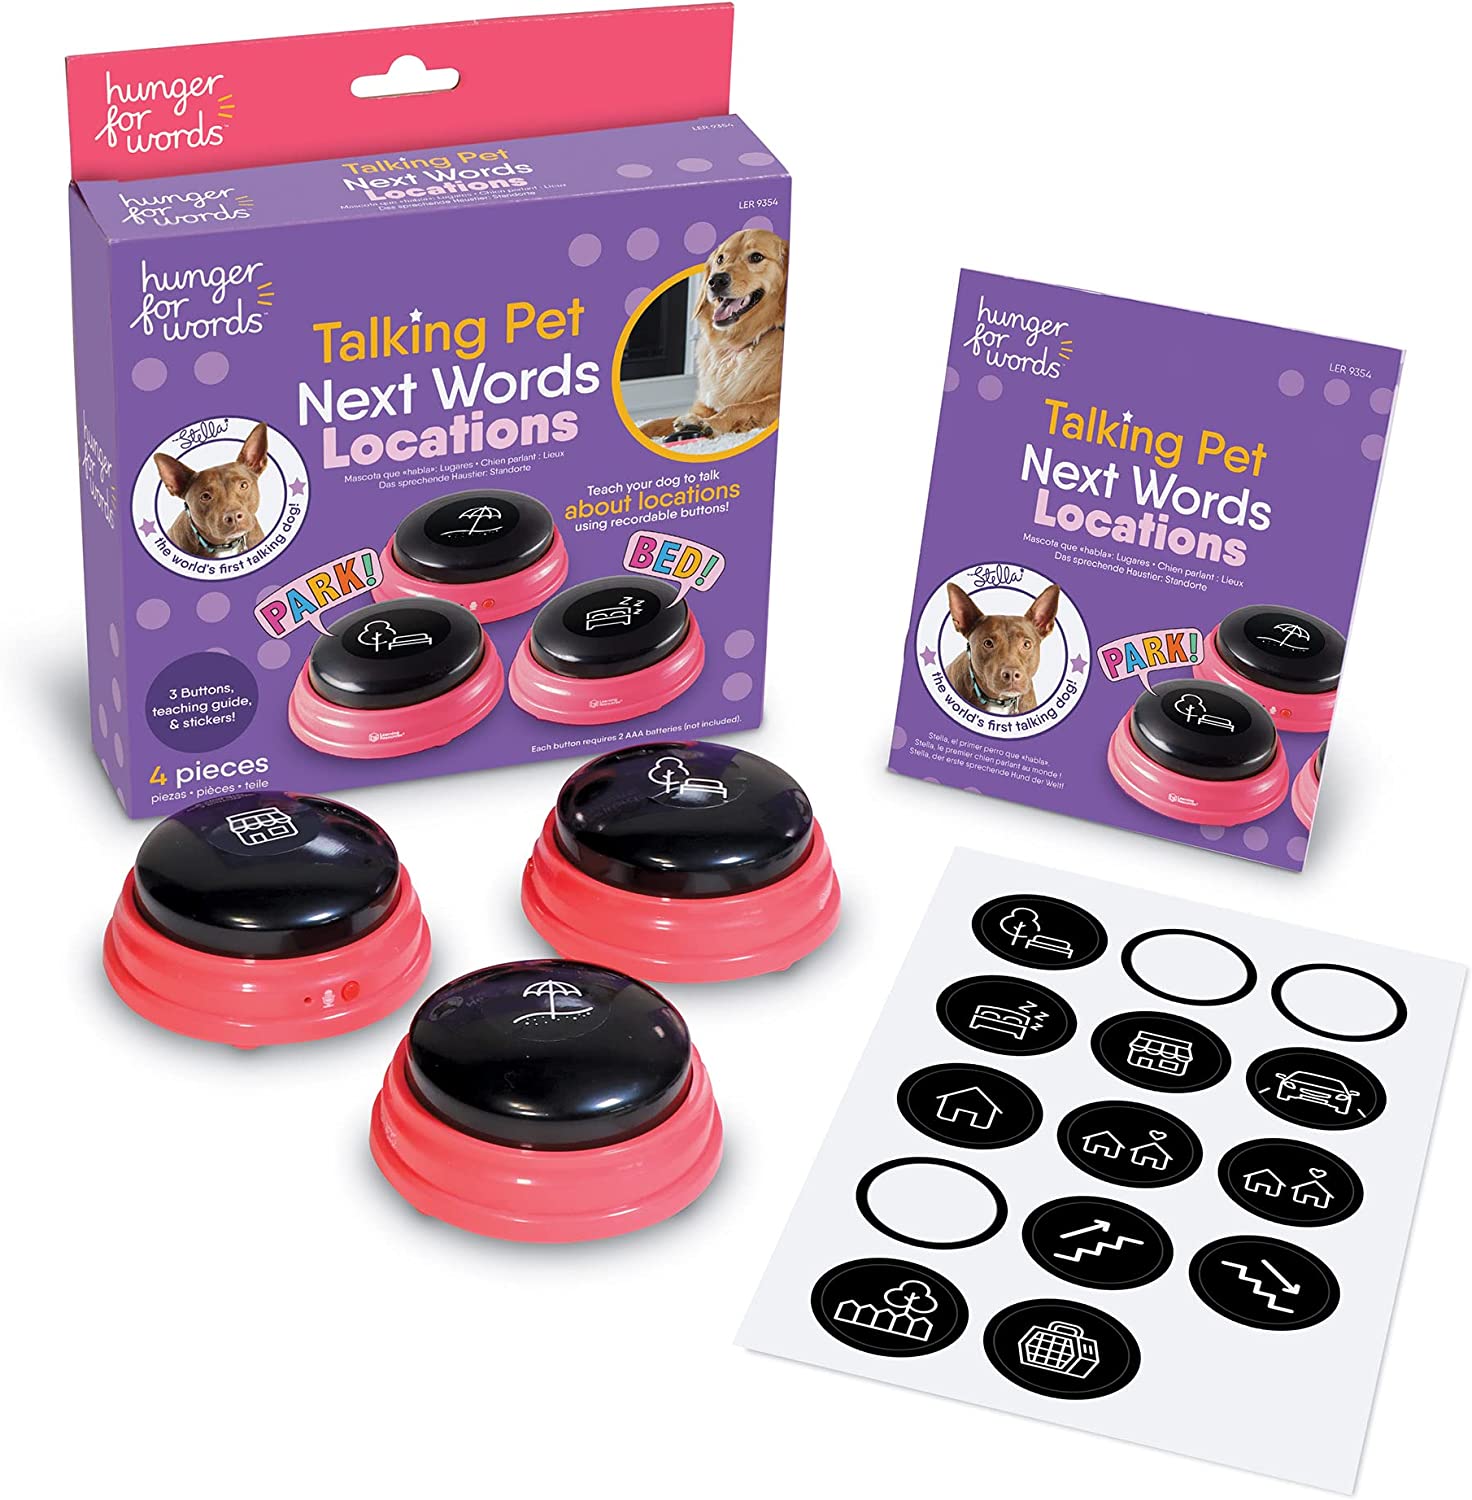 3-Piece Learning Resources Hunger for Words Talking Pet Next Words Speech Buttons for Dogs (Locations) $10.31 + Free Shipping w/ Prime or on $25+